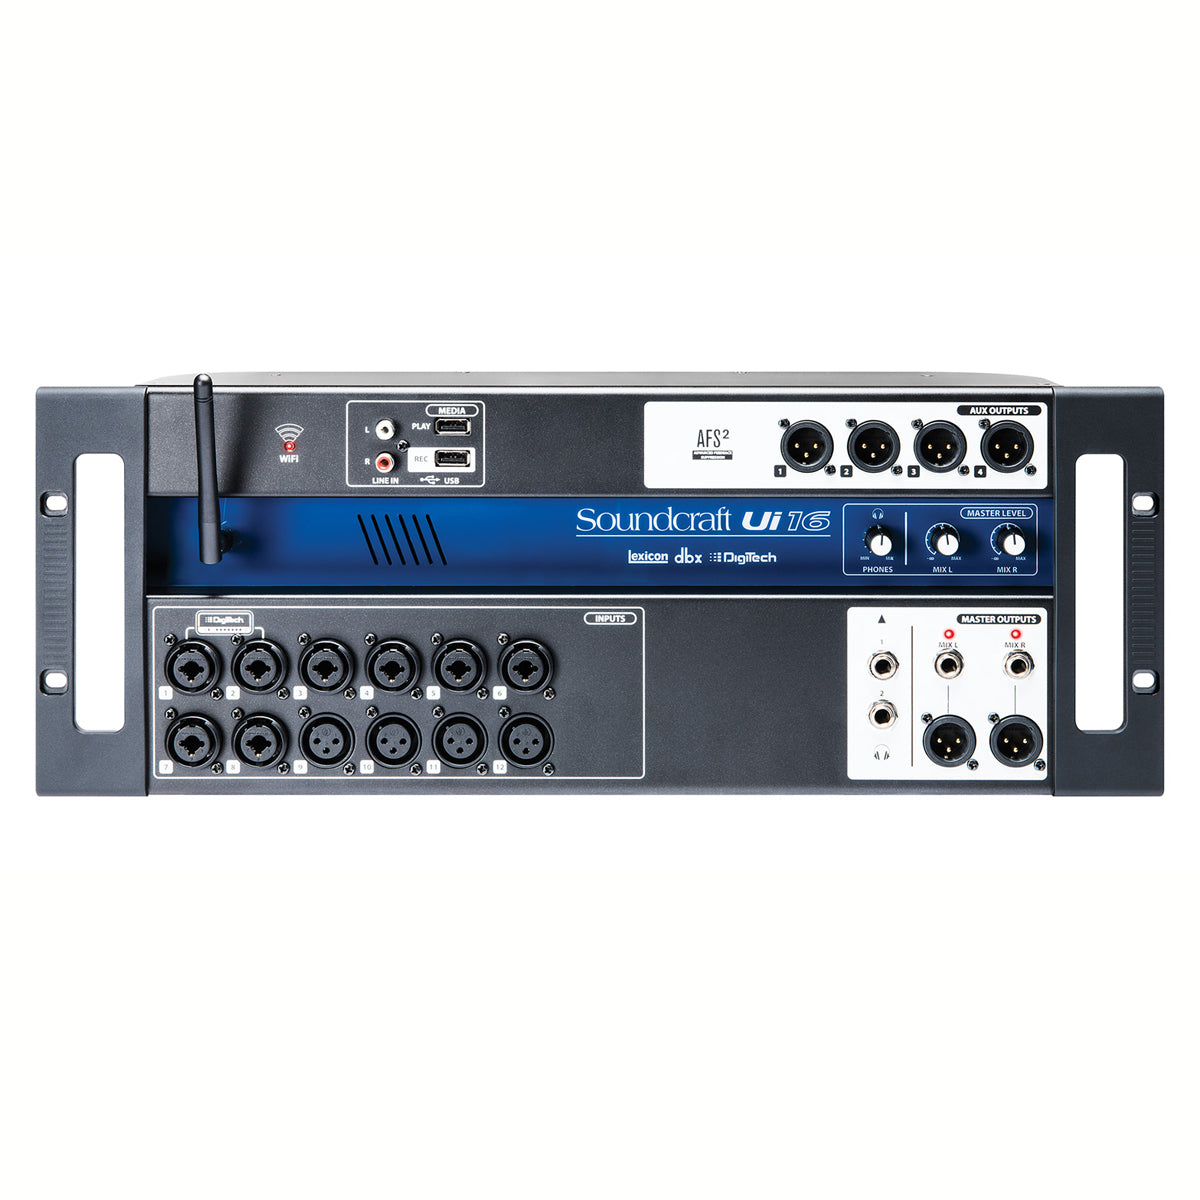 Soundcraft UI16 Remote Controlled 16 Channel Digital Mixer